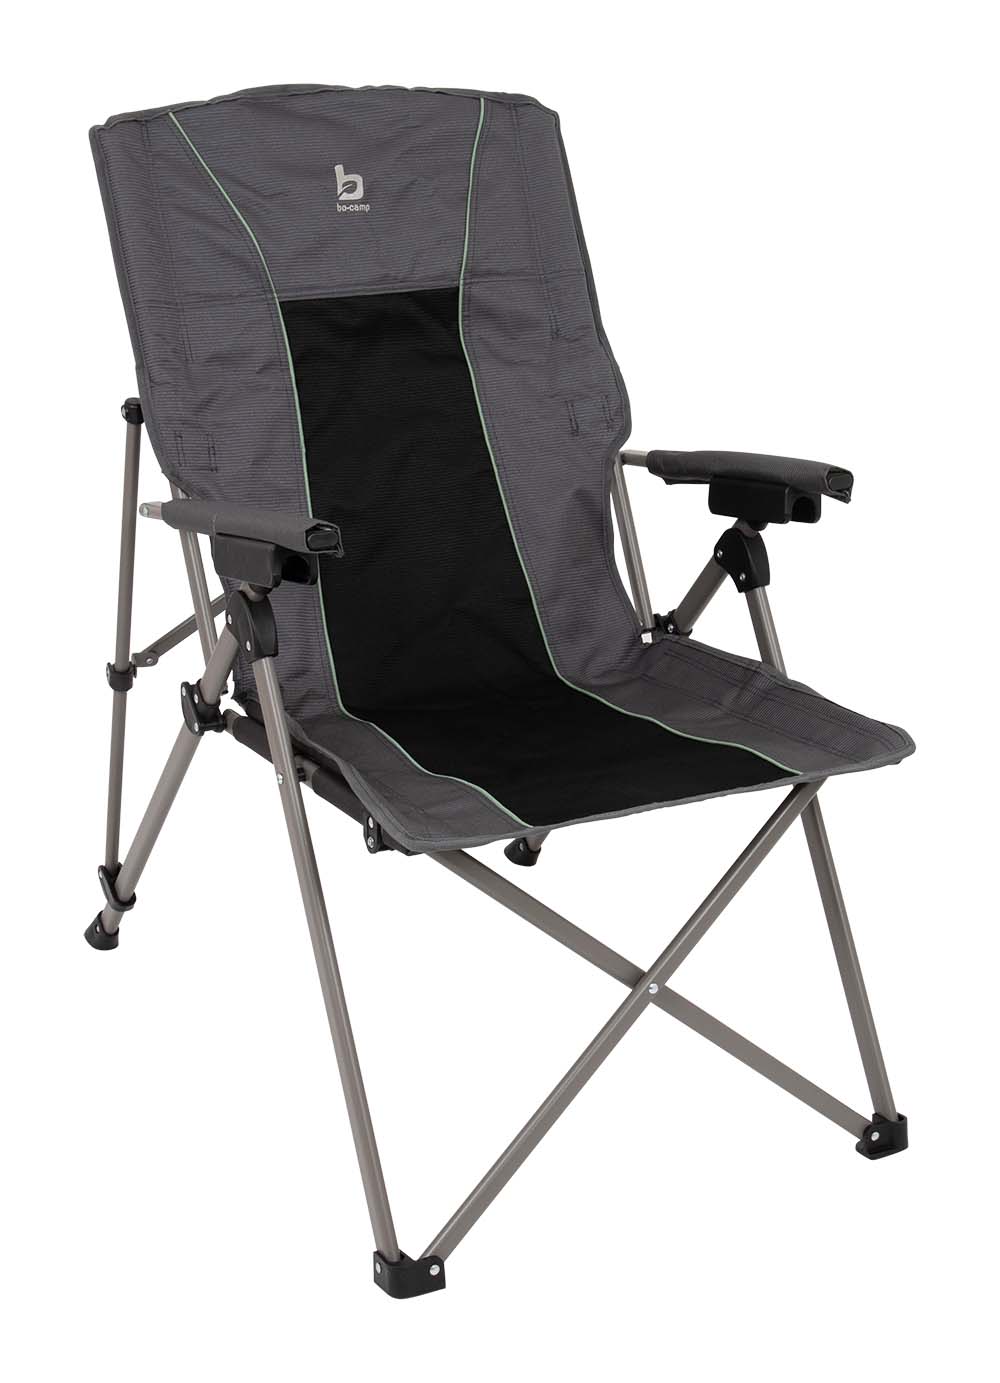 1204738 A luxury folding chair with an adjustable back rest.  The back rest of this comfortable chair can be adjusted into 4 positions. Ideal chair for a more active seat to the table. Extra strong due to the steel frame and 600 denier nylon covering. The arm rests are covered for extra comfort. Is delivered in a handy carrying case (lxwxh: 102x18x18 cm). Seat height: 43 centimetres. Seat depth: 45-50 centimetres. Seat width: 62 centimetres. Length of back rest: 64 centimetres. Maximum weight: 100 kilograms.